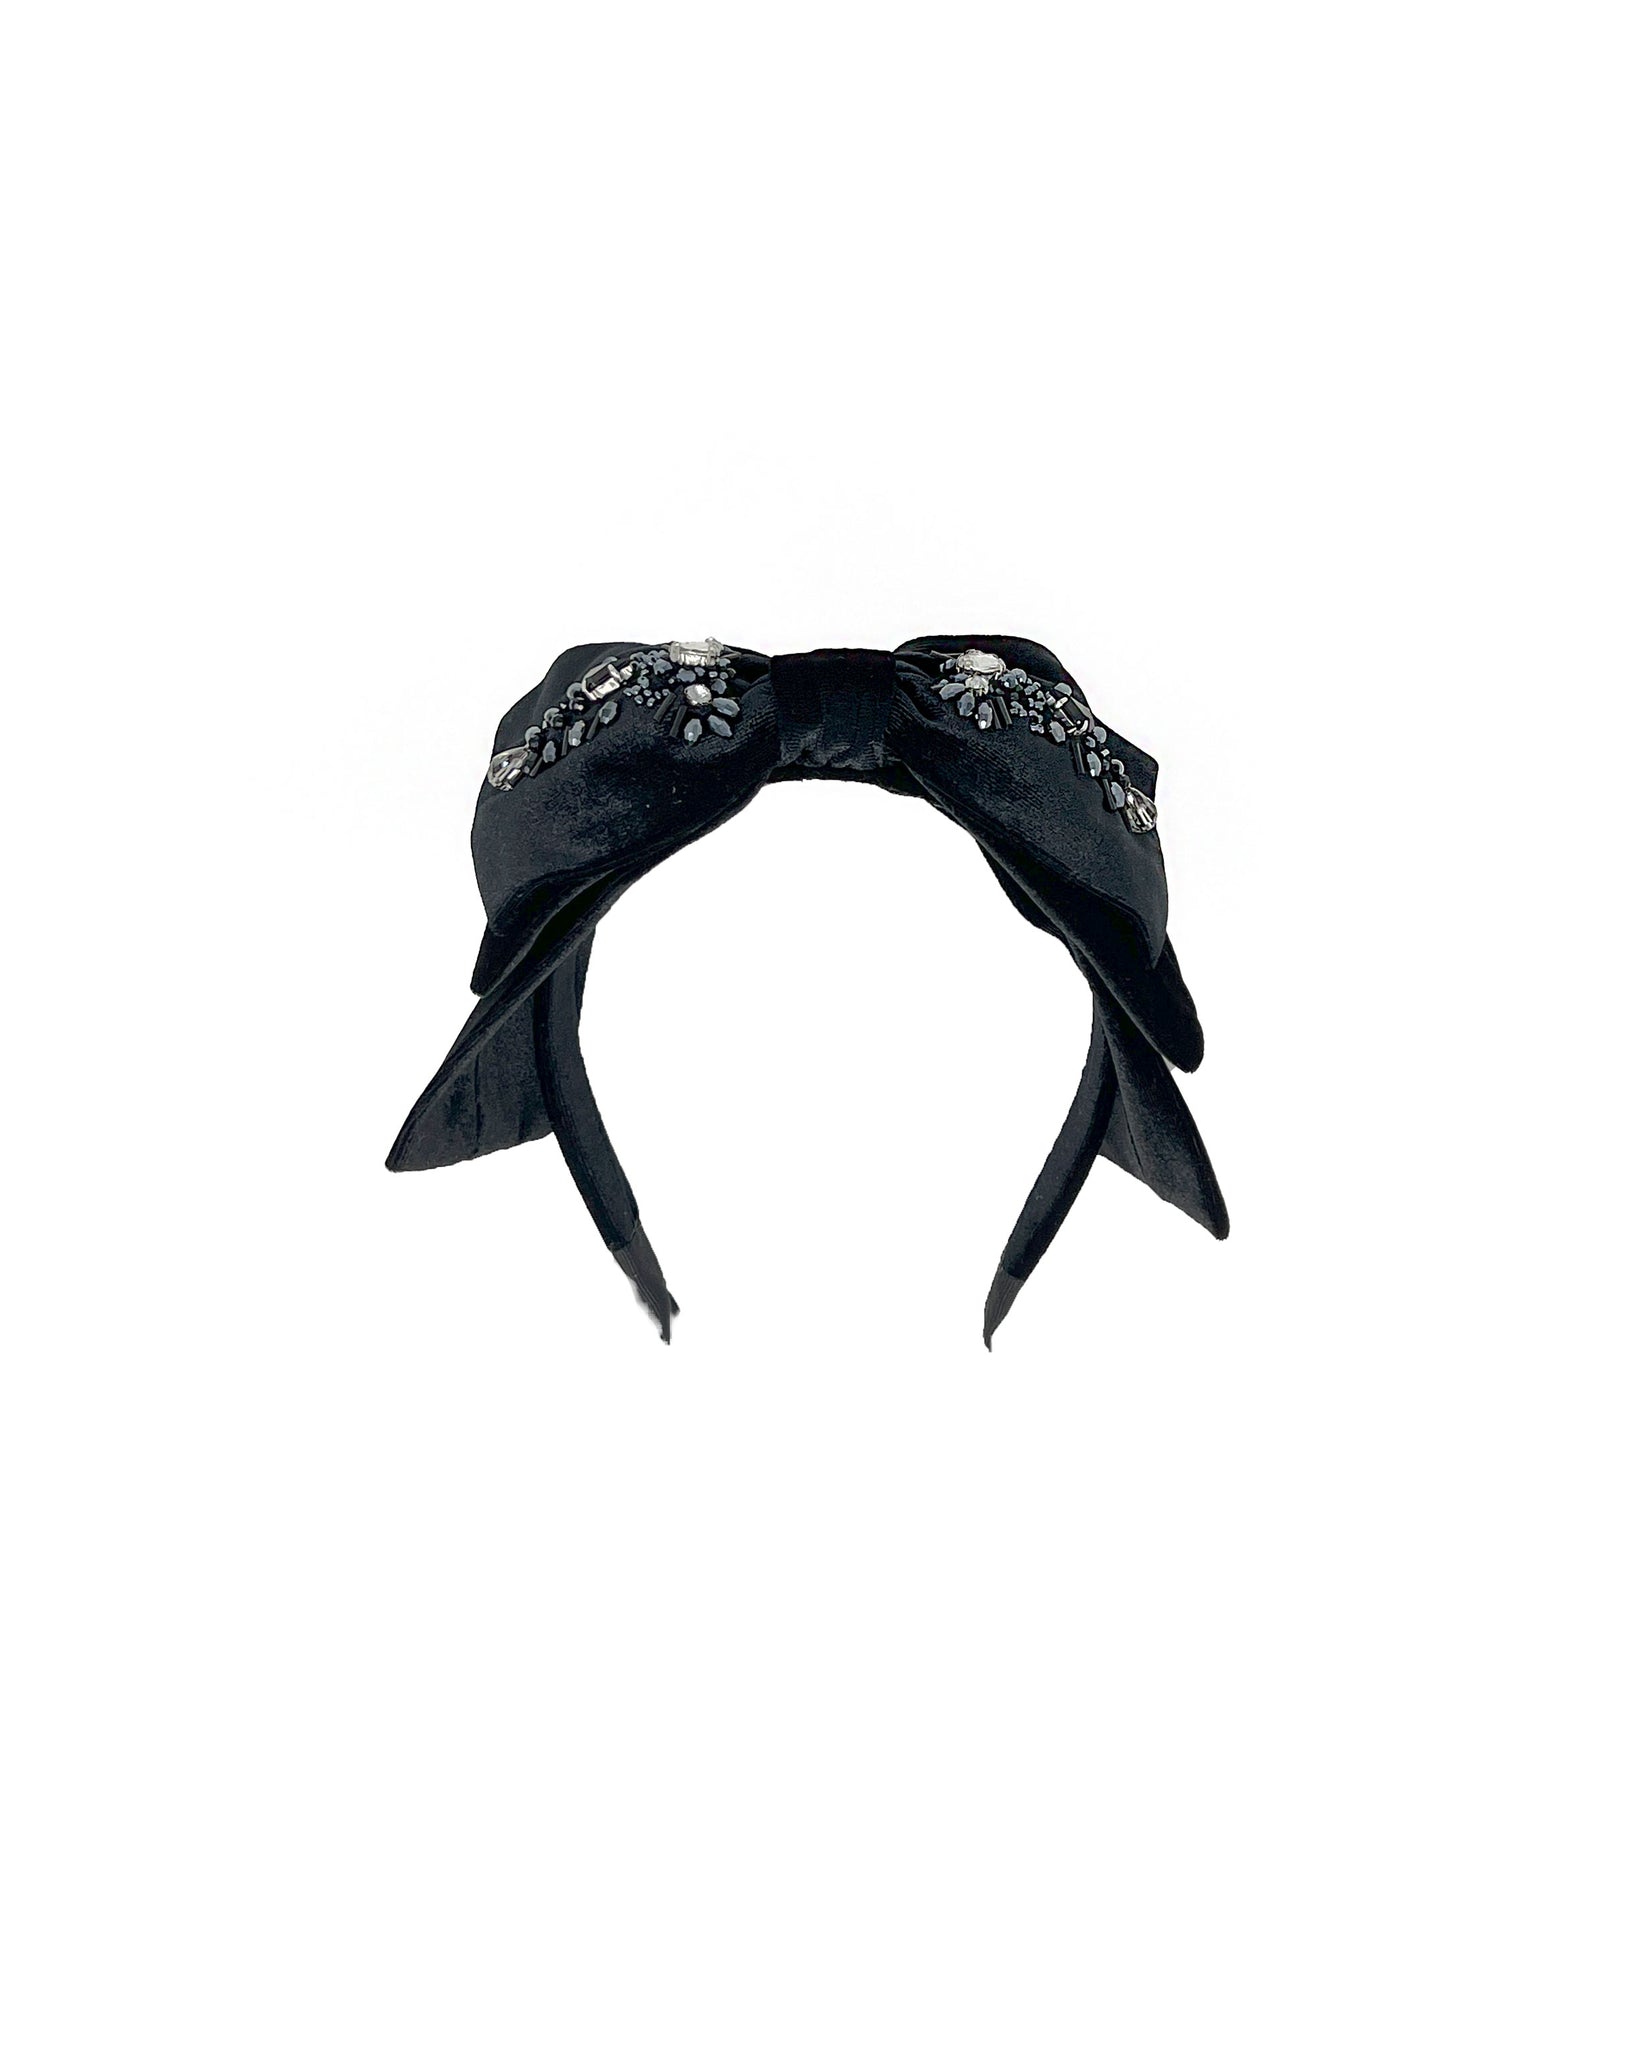 Black and silver embroidered black velvet hairband with double bow